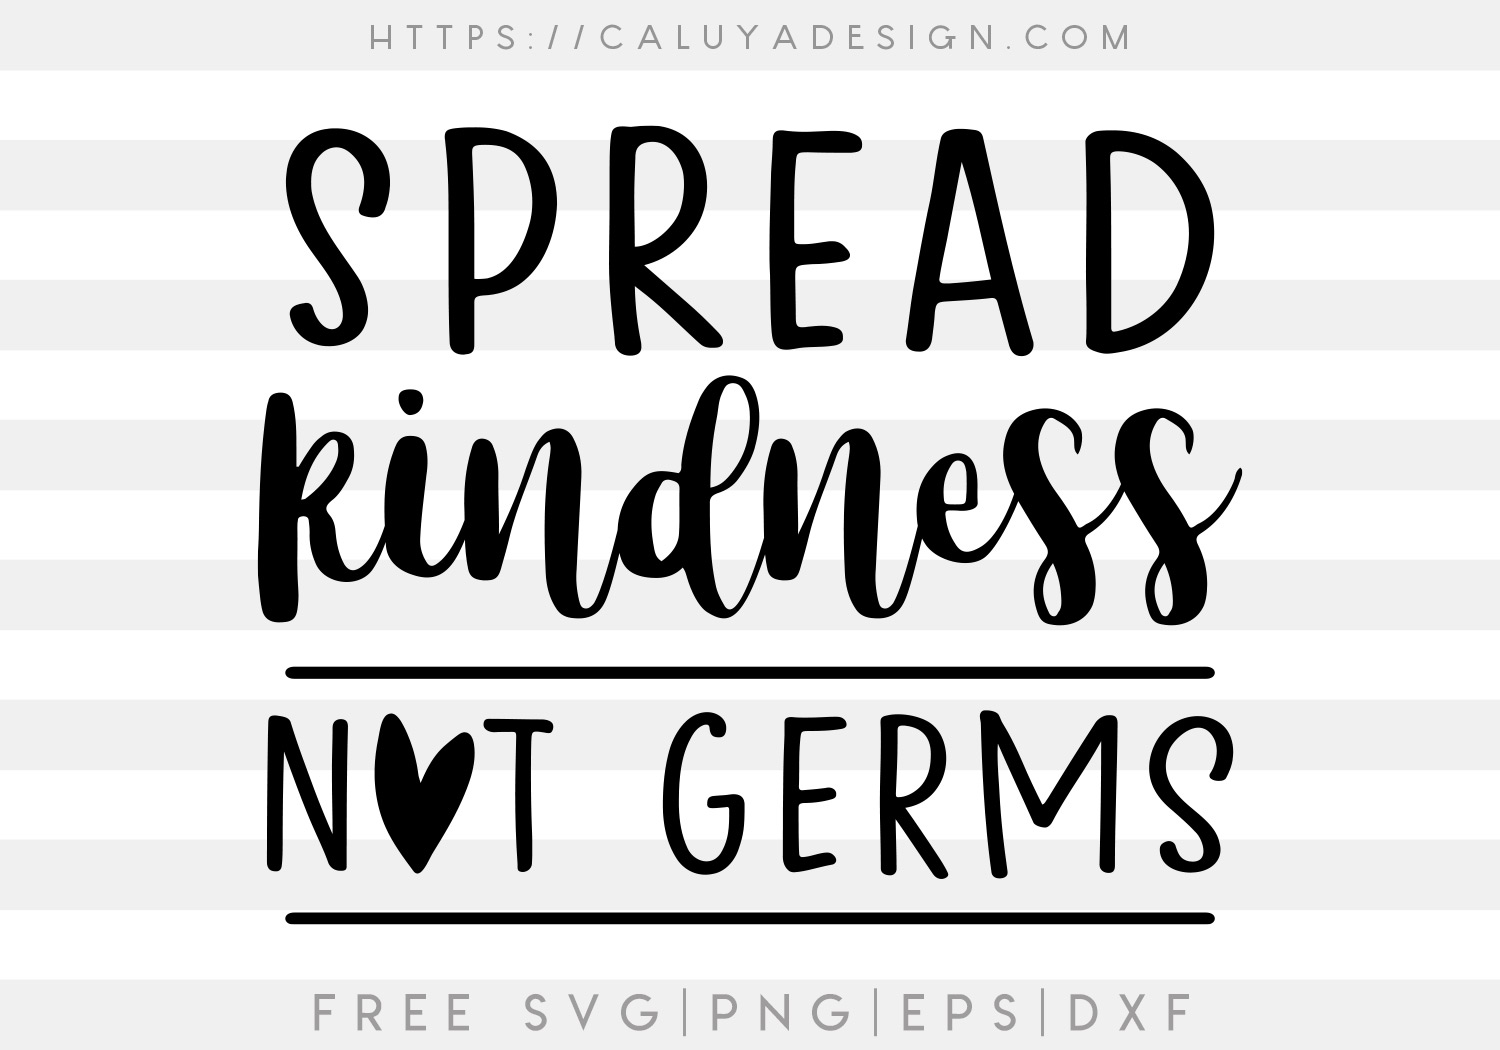 Spread Kindness Not Germs SVG, PNG, EPS & DXF